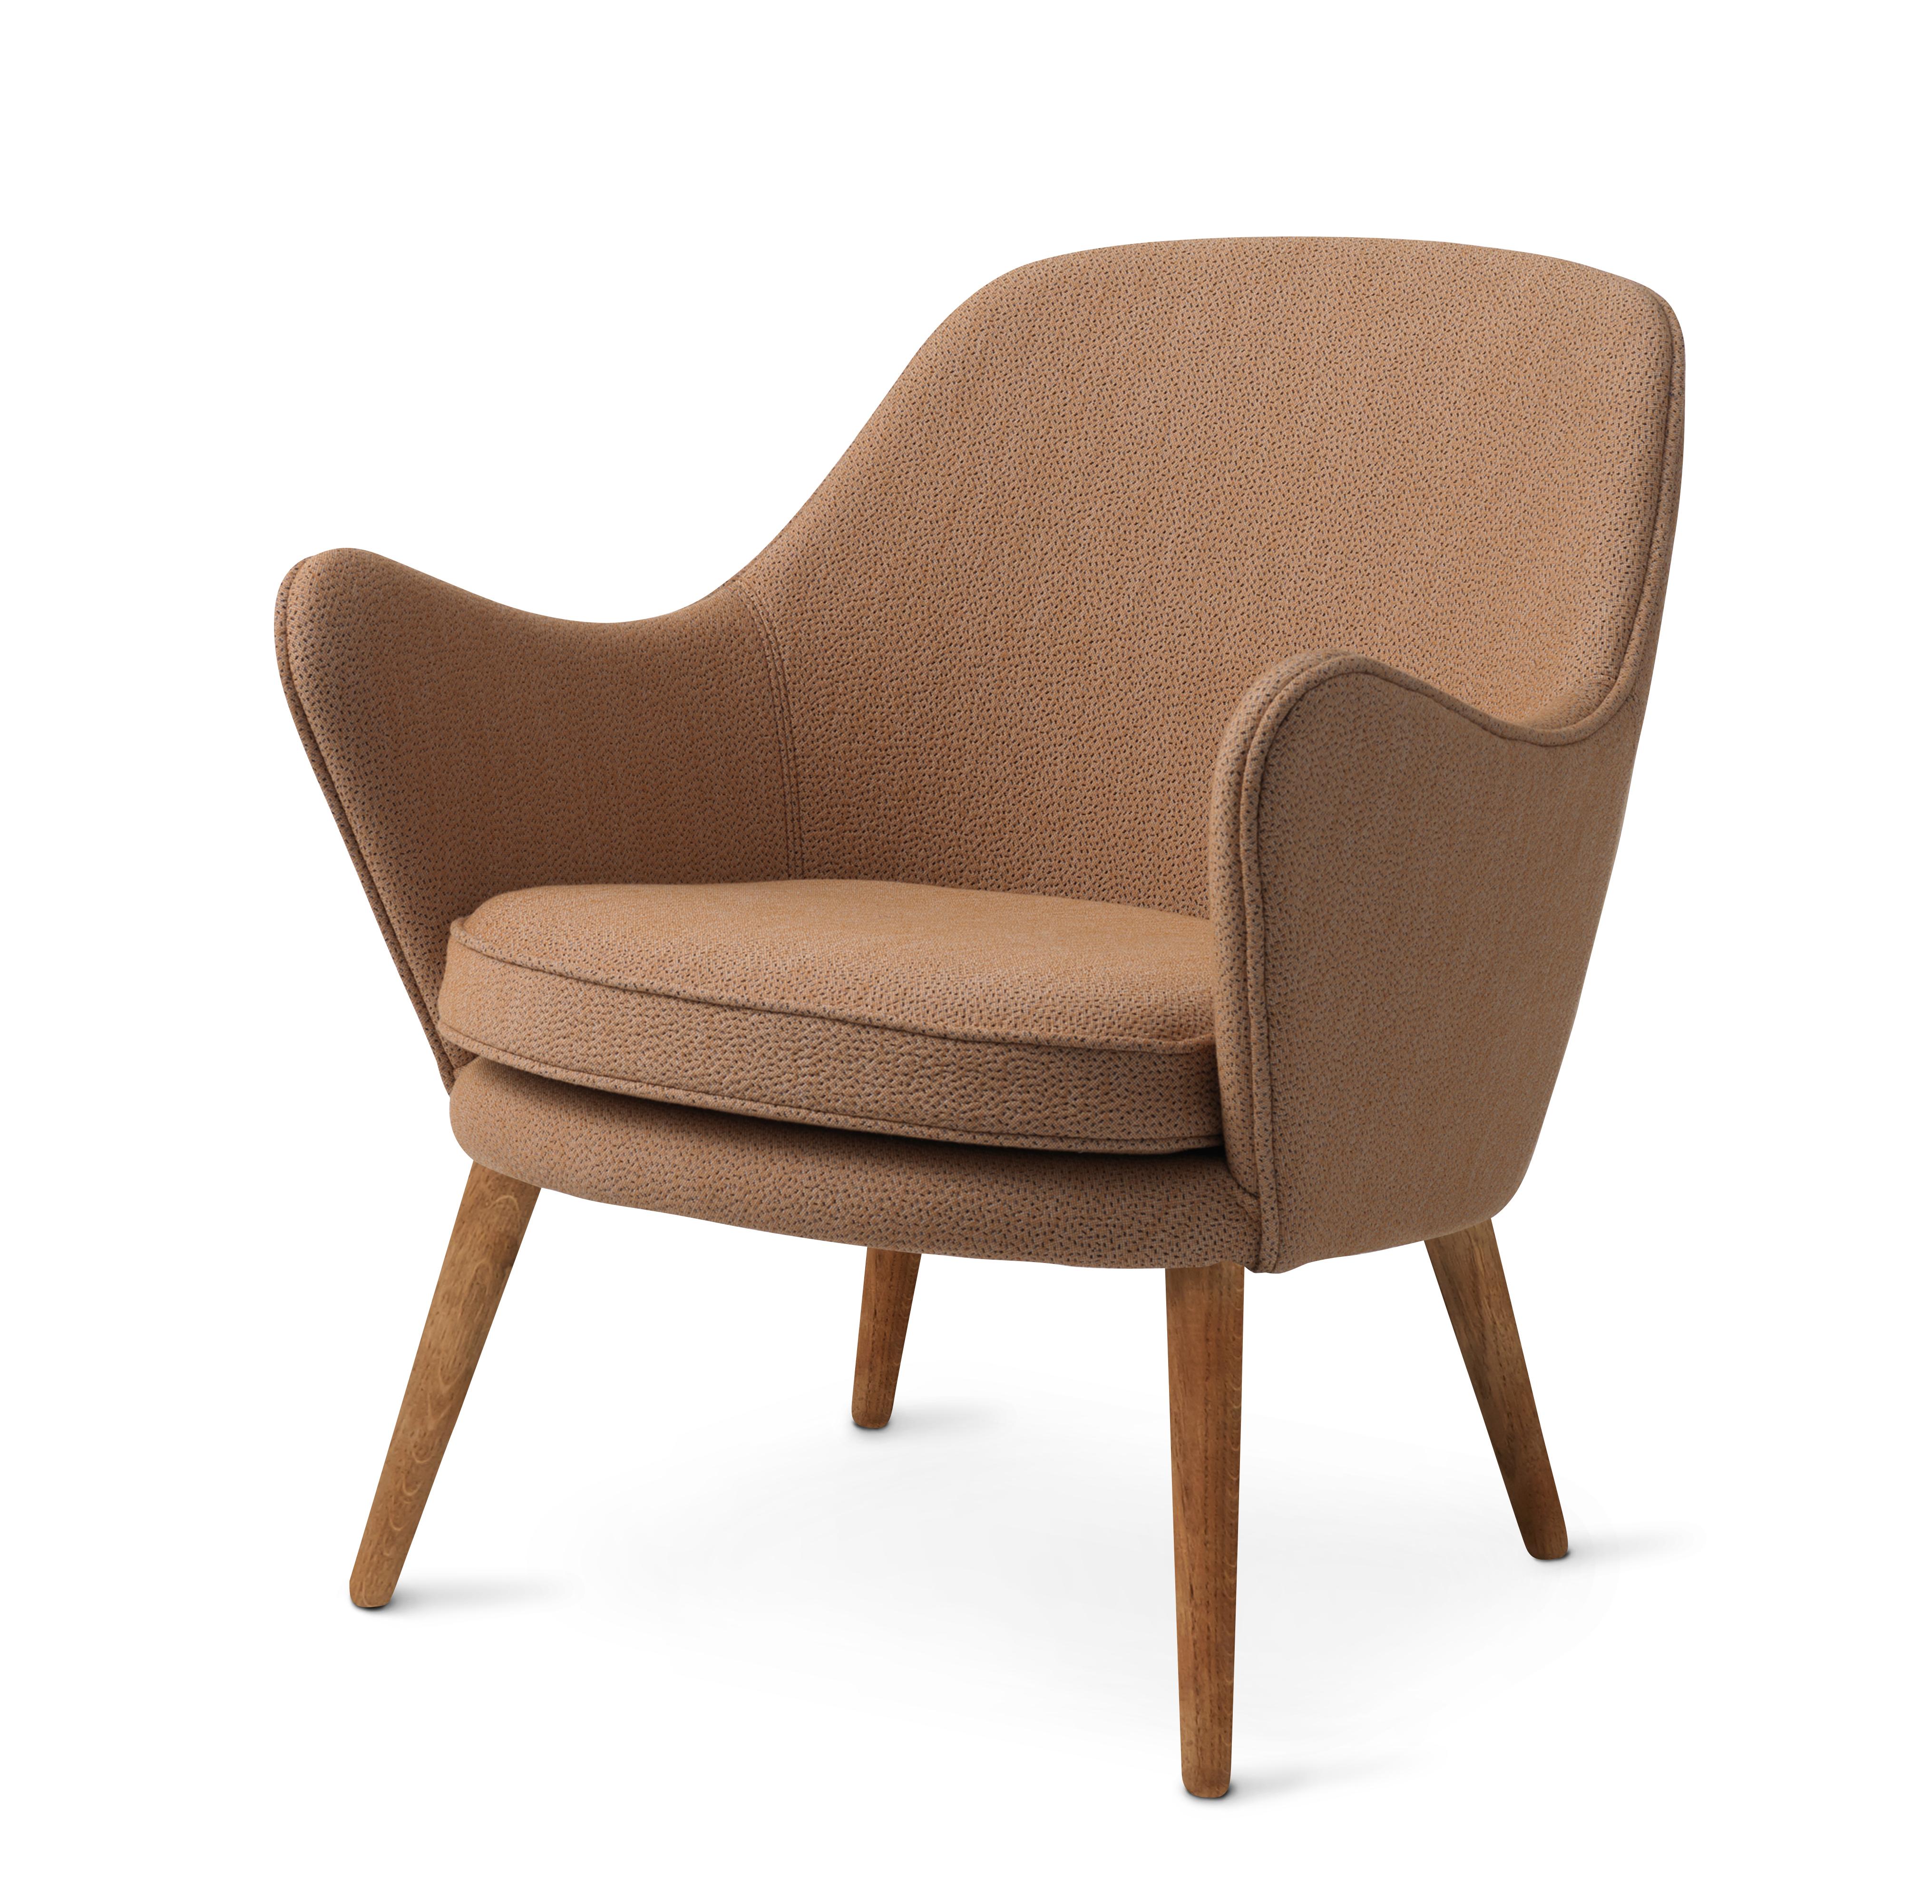 For Sale: Beige (Sprinkles 254) Dwell Lounge Chair, by Hans Olsen from Warm Nordic